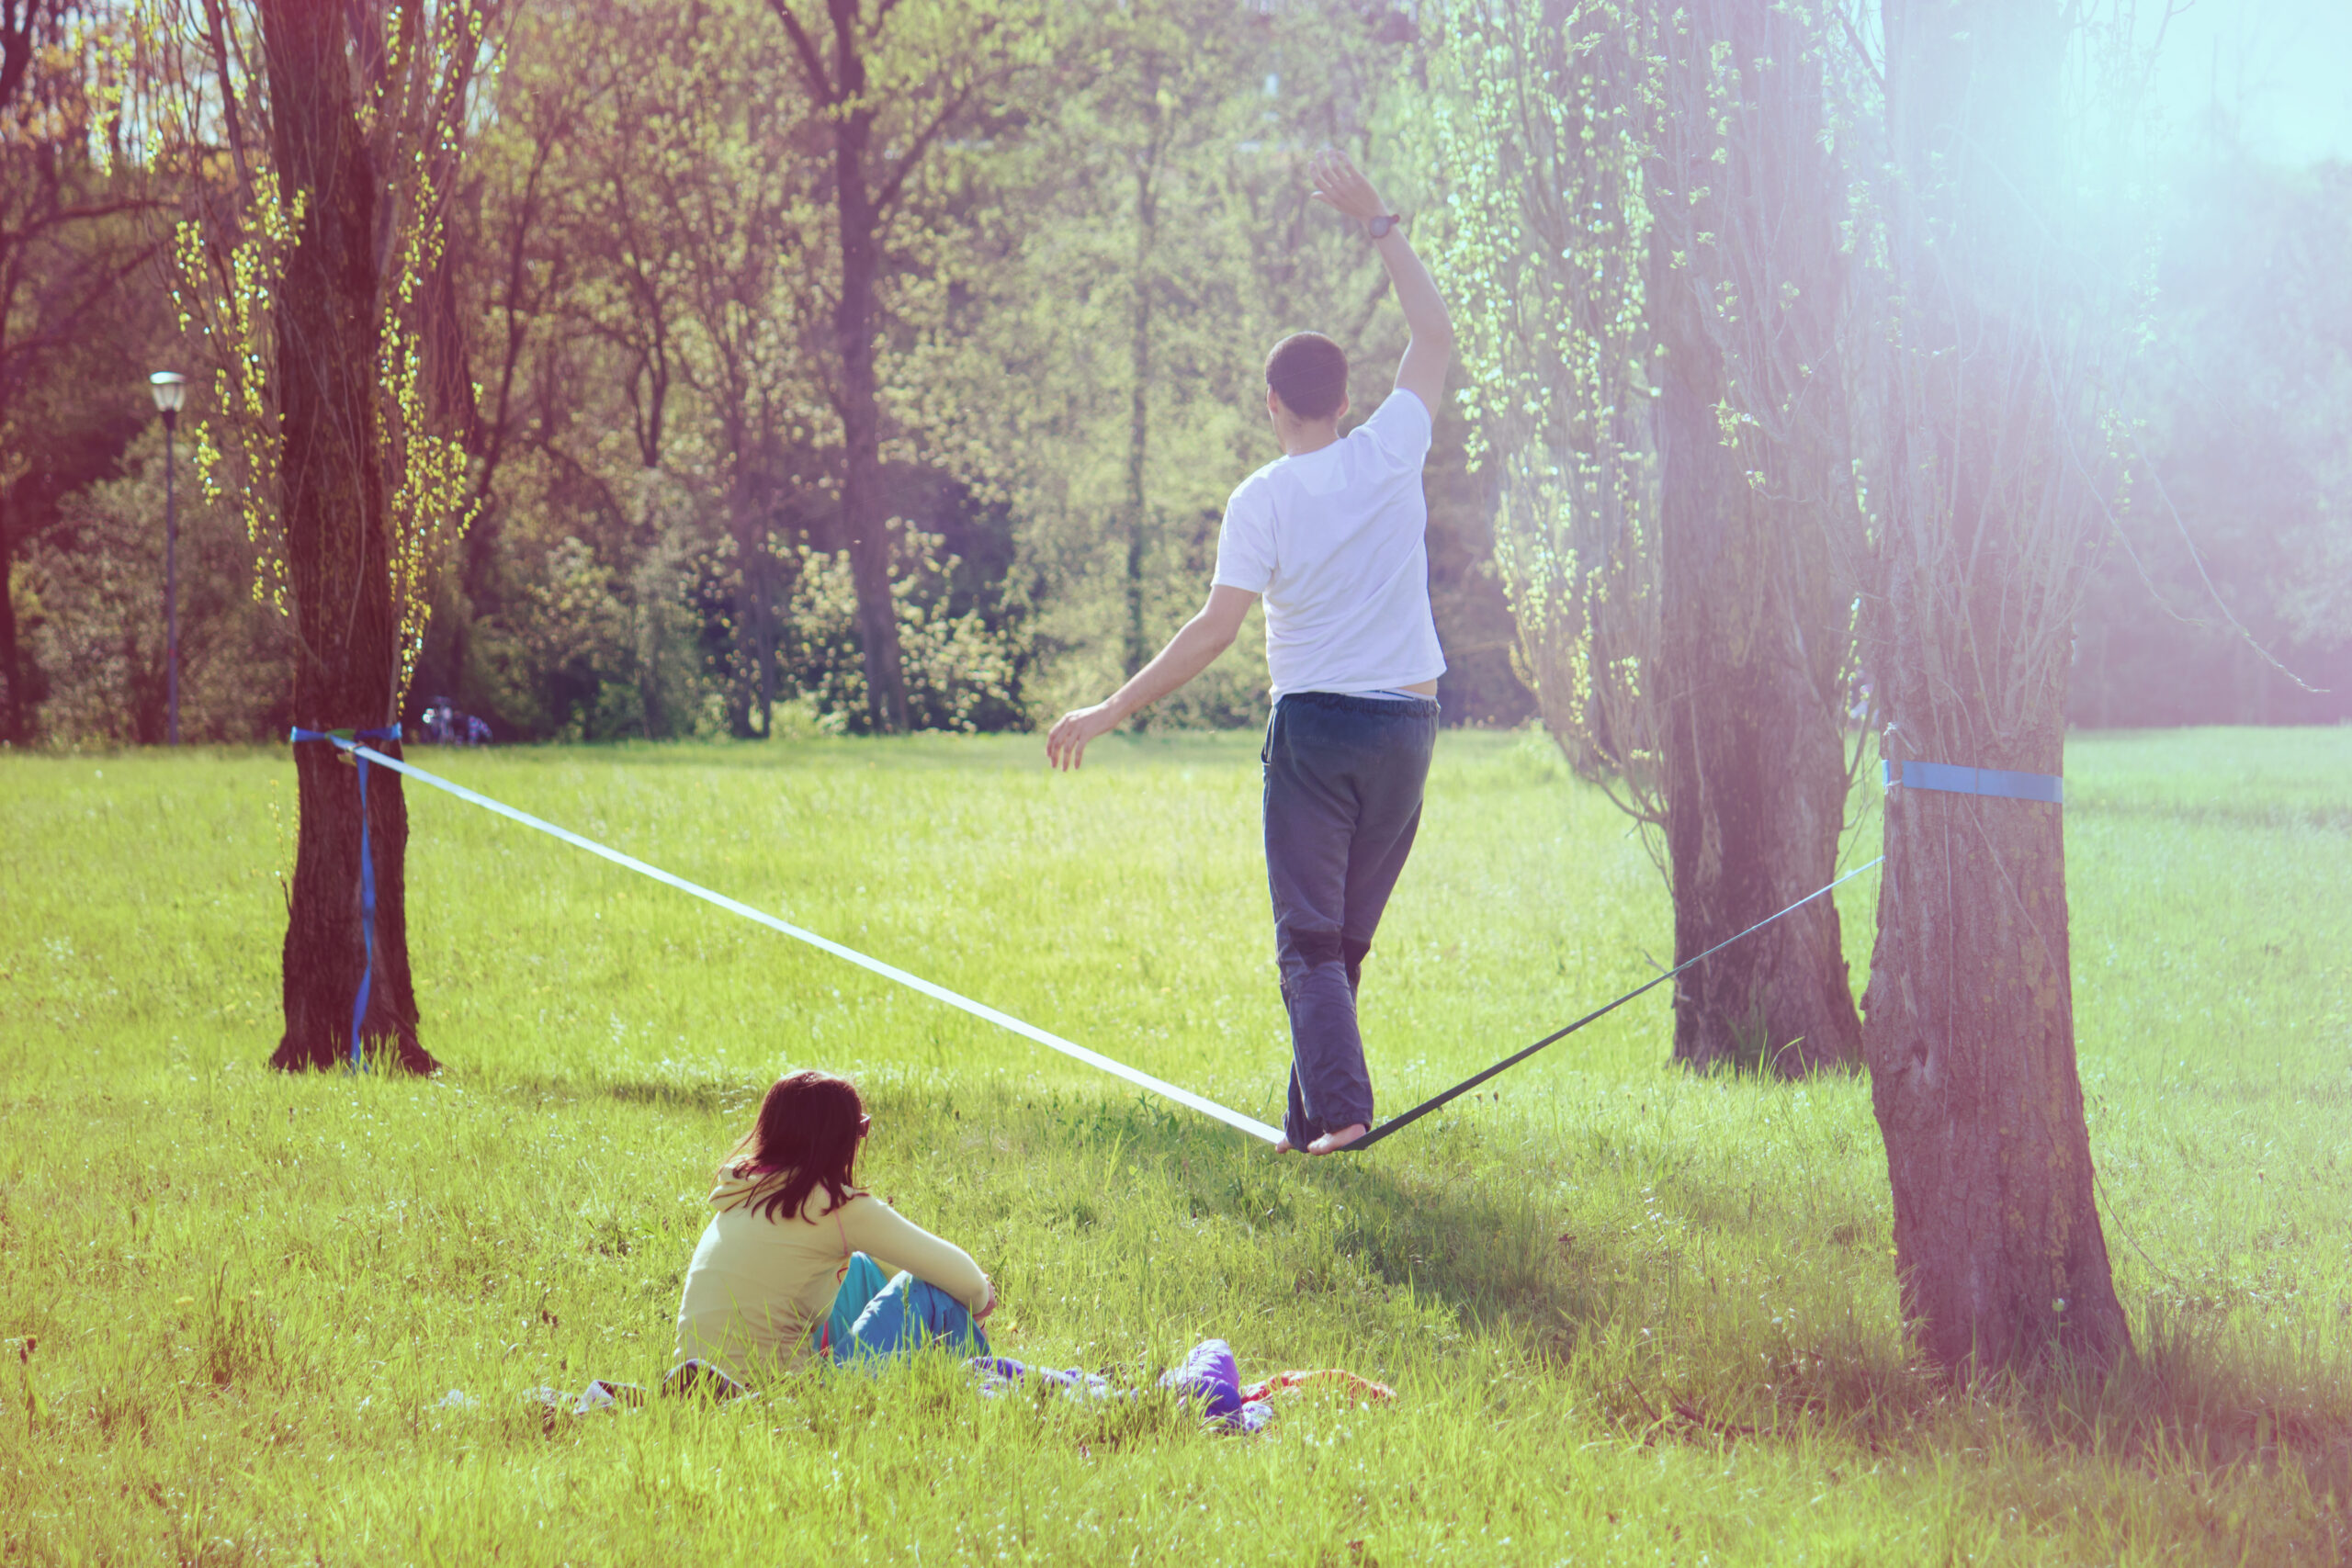 What muscles does slacklining work?